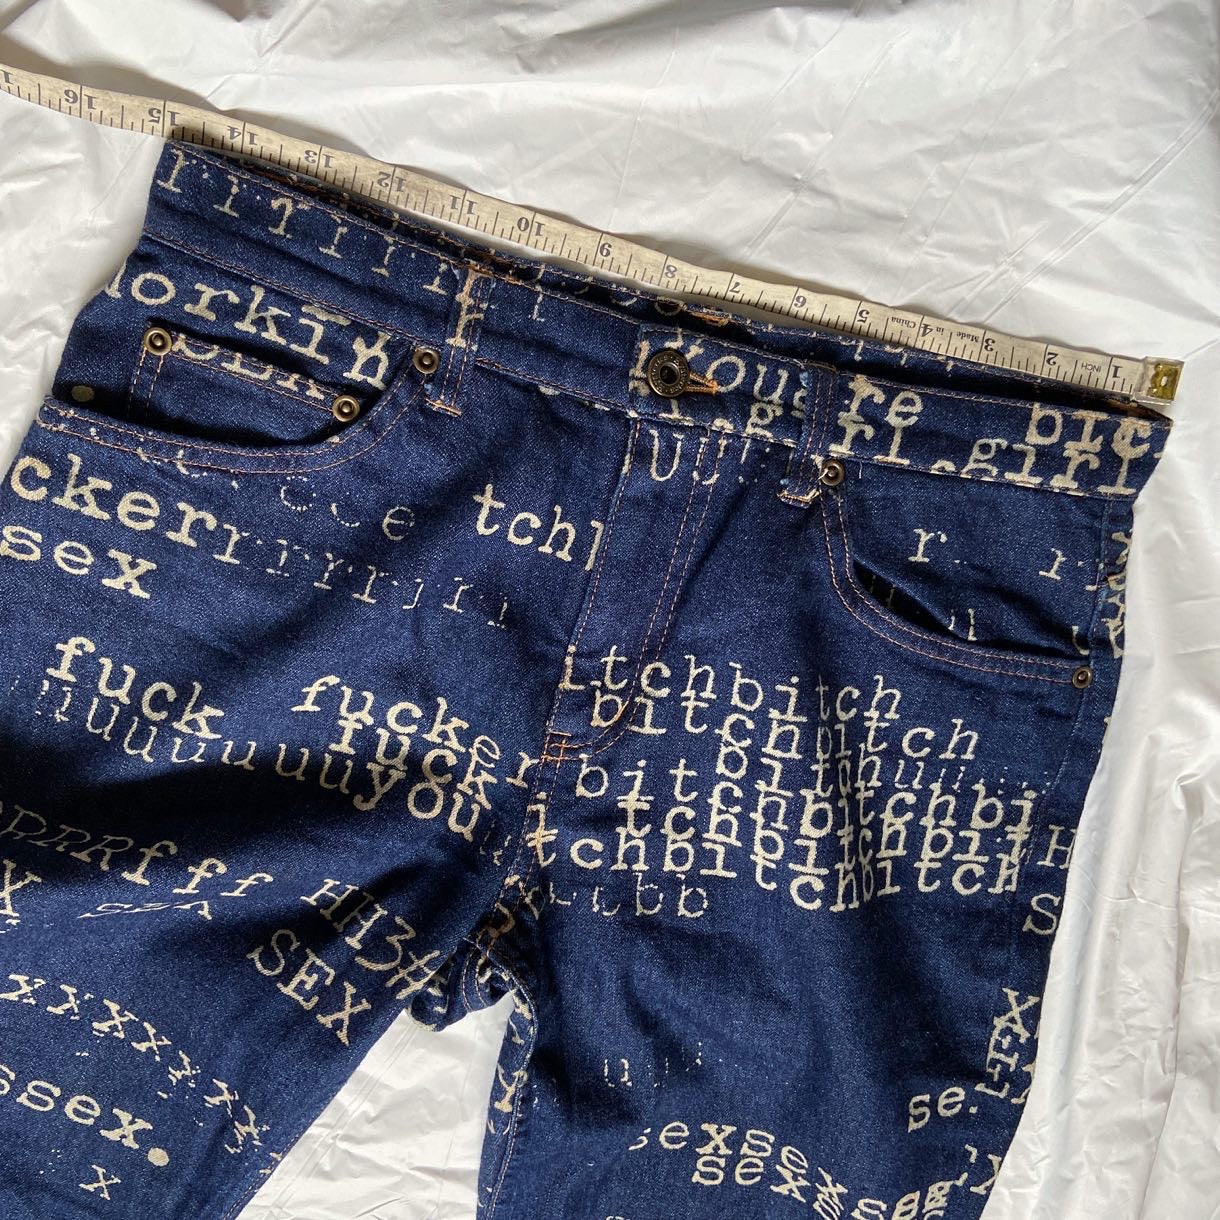 Hysteric Glamour Ss99 “fuck Sex Bitch” Typewriter Print Flared Denim Dusty Archive 7153